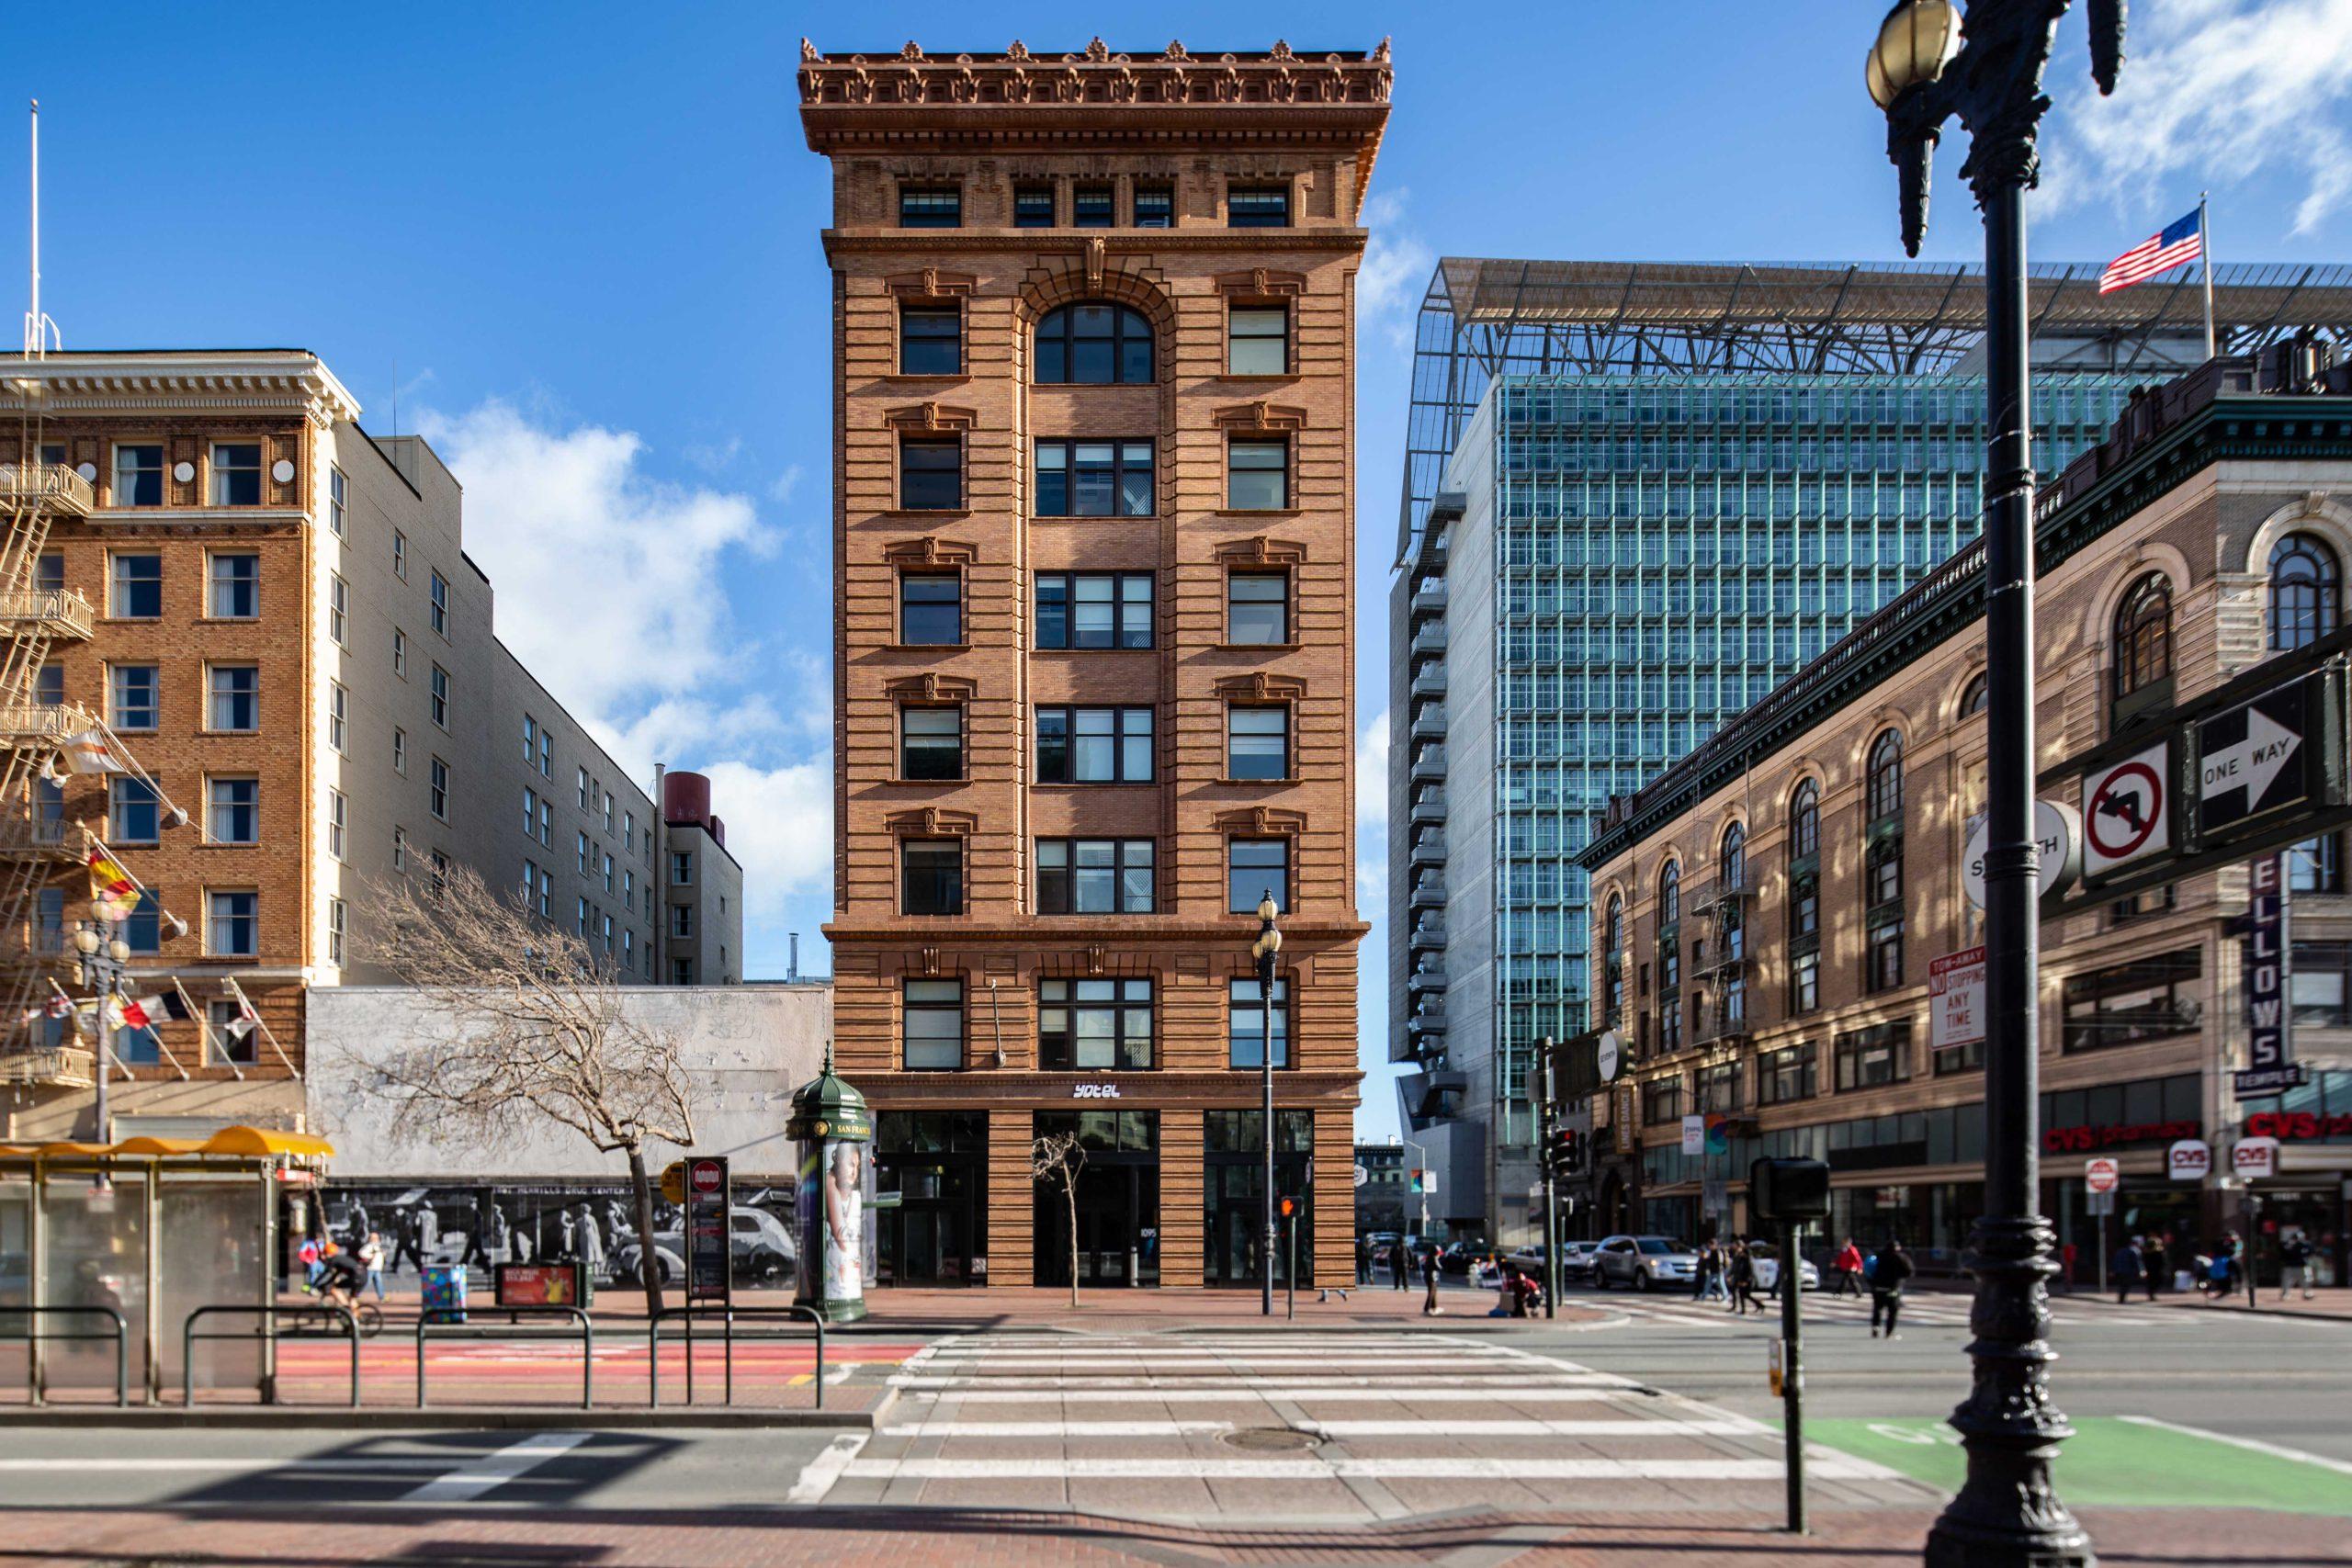 The 1903 Grant Building was saved by a team of contractors, architects and preservationists.